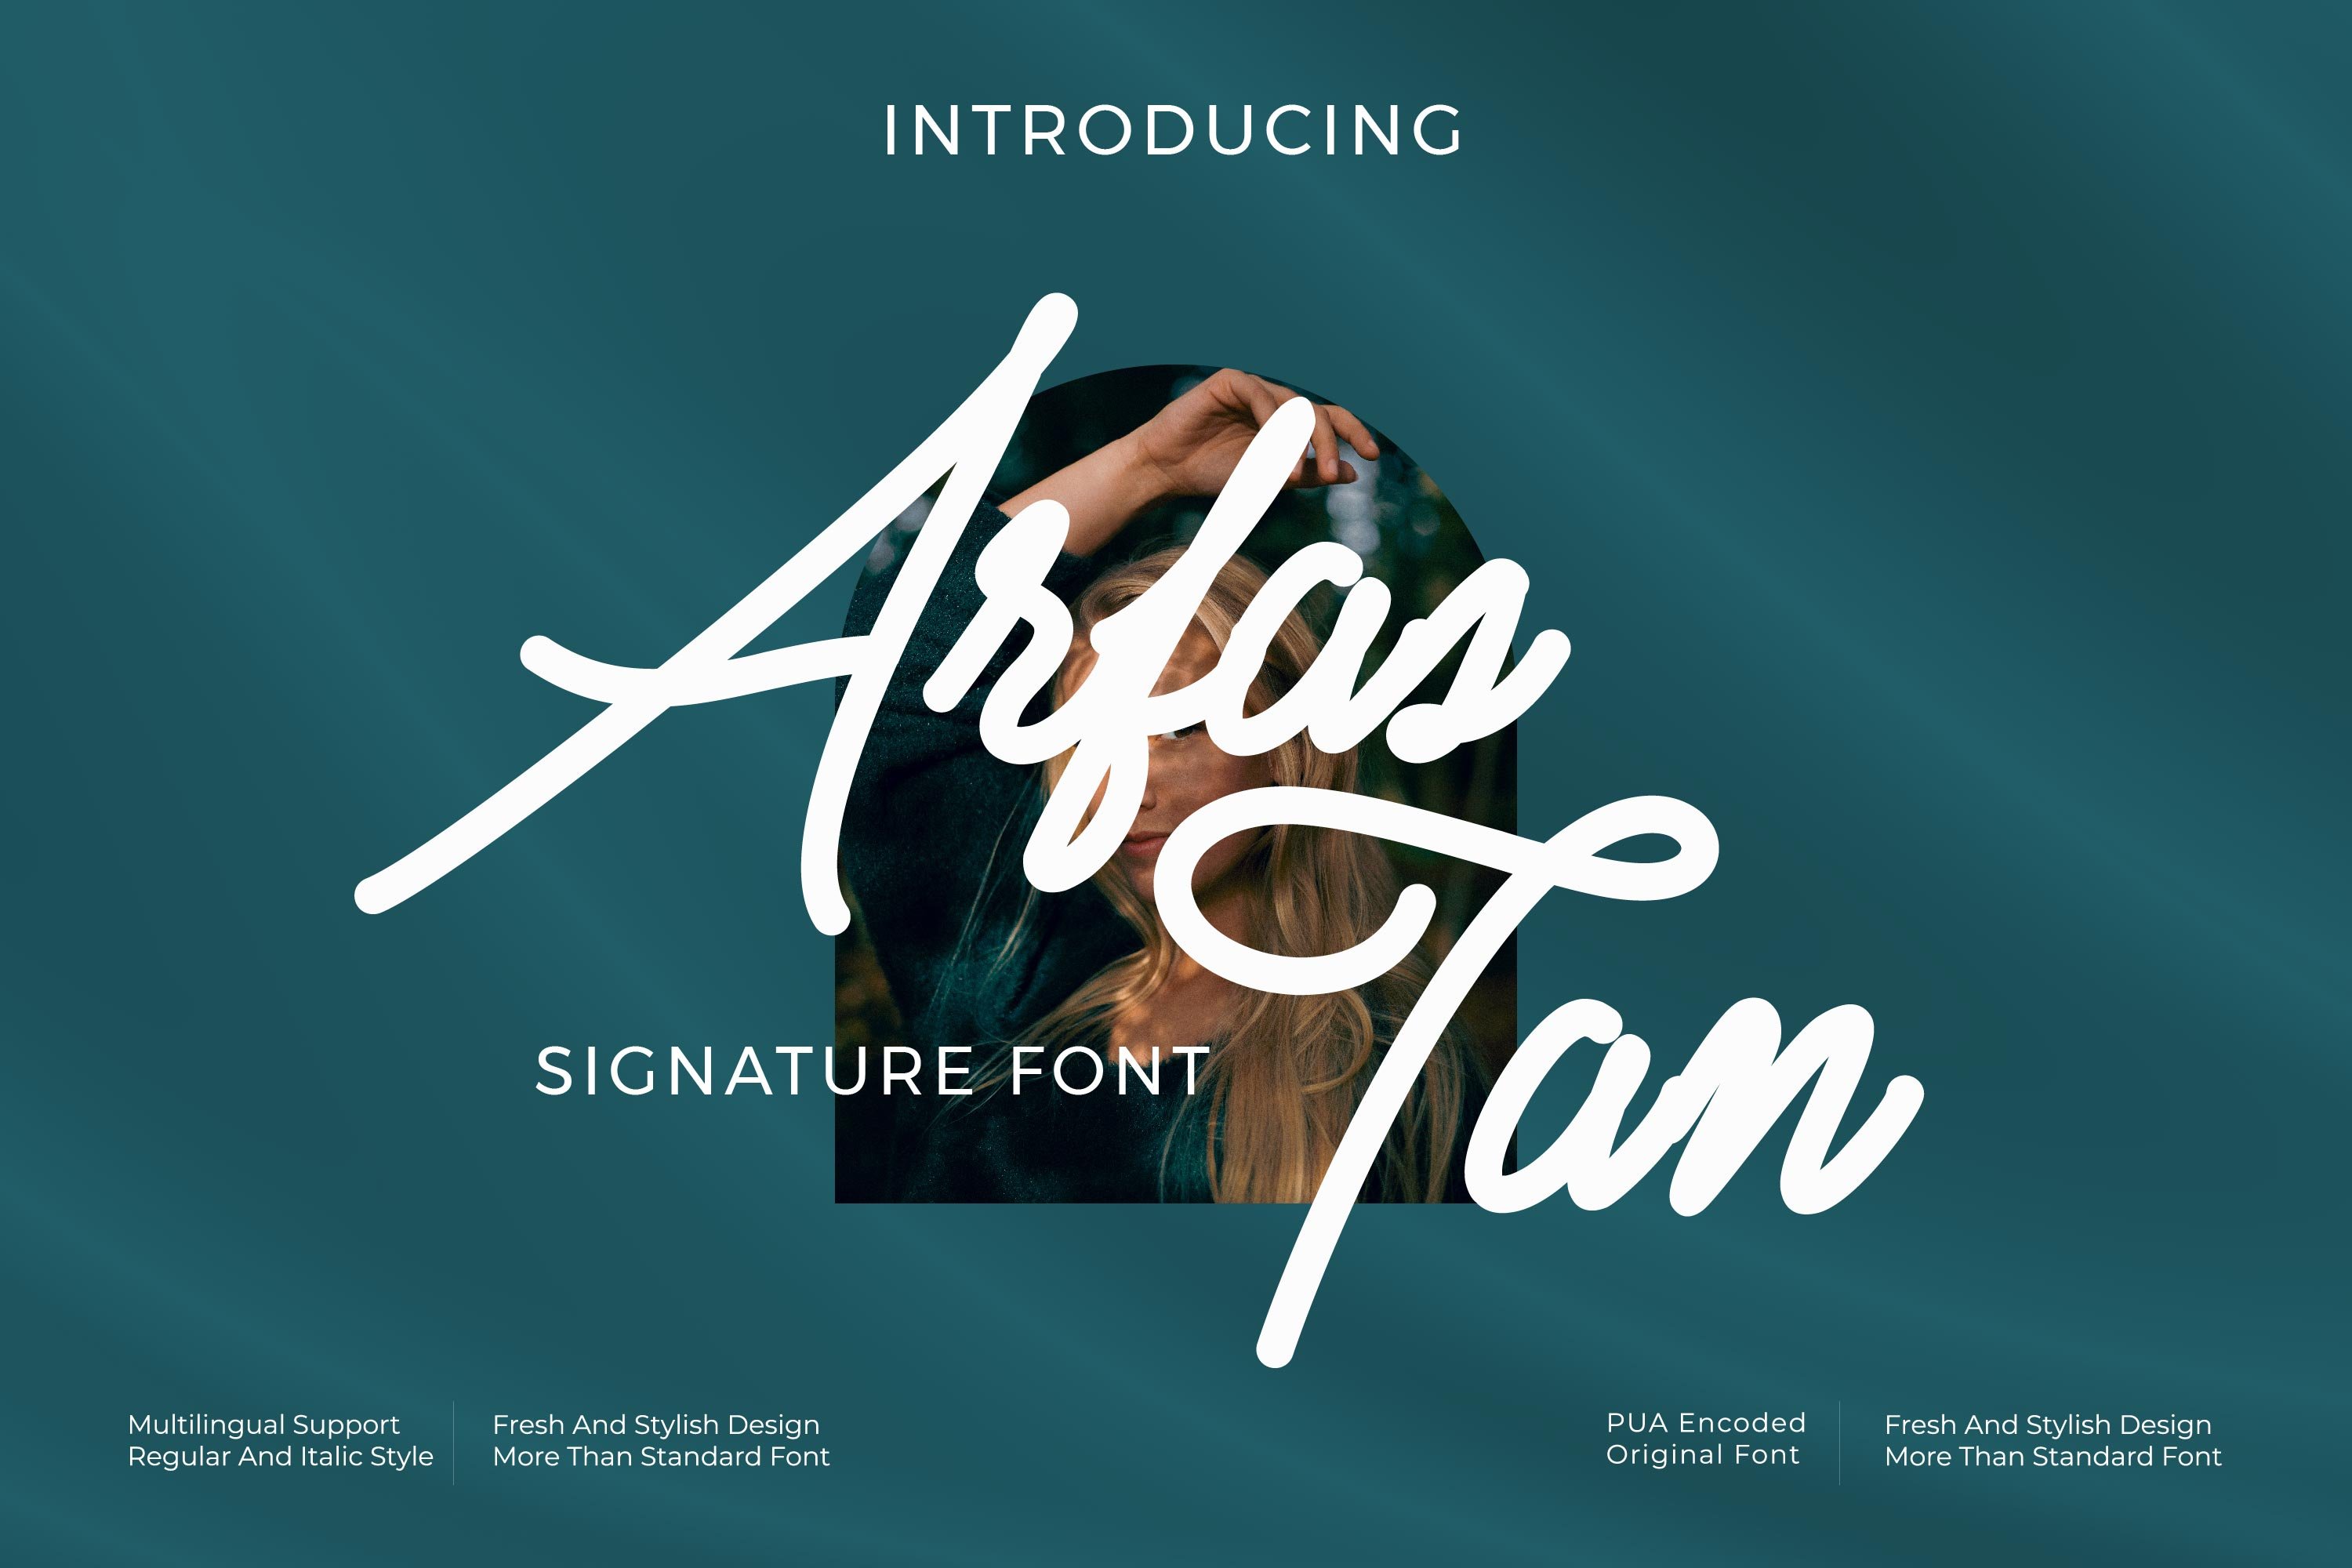 Arfas Tan - Signature style font cover image.